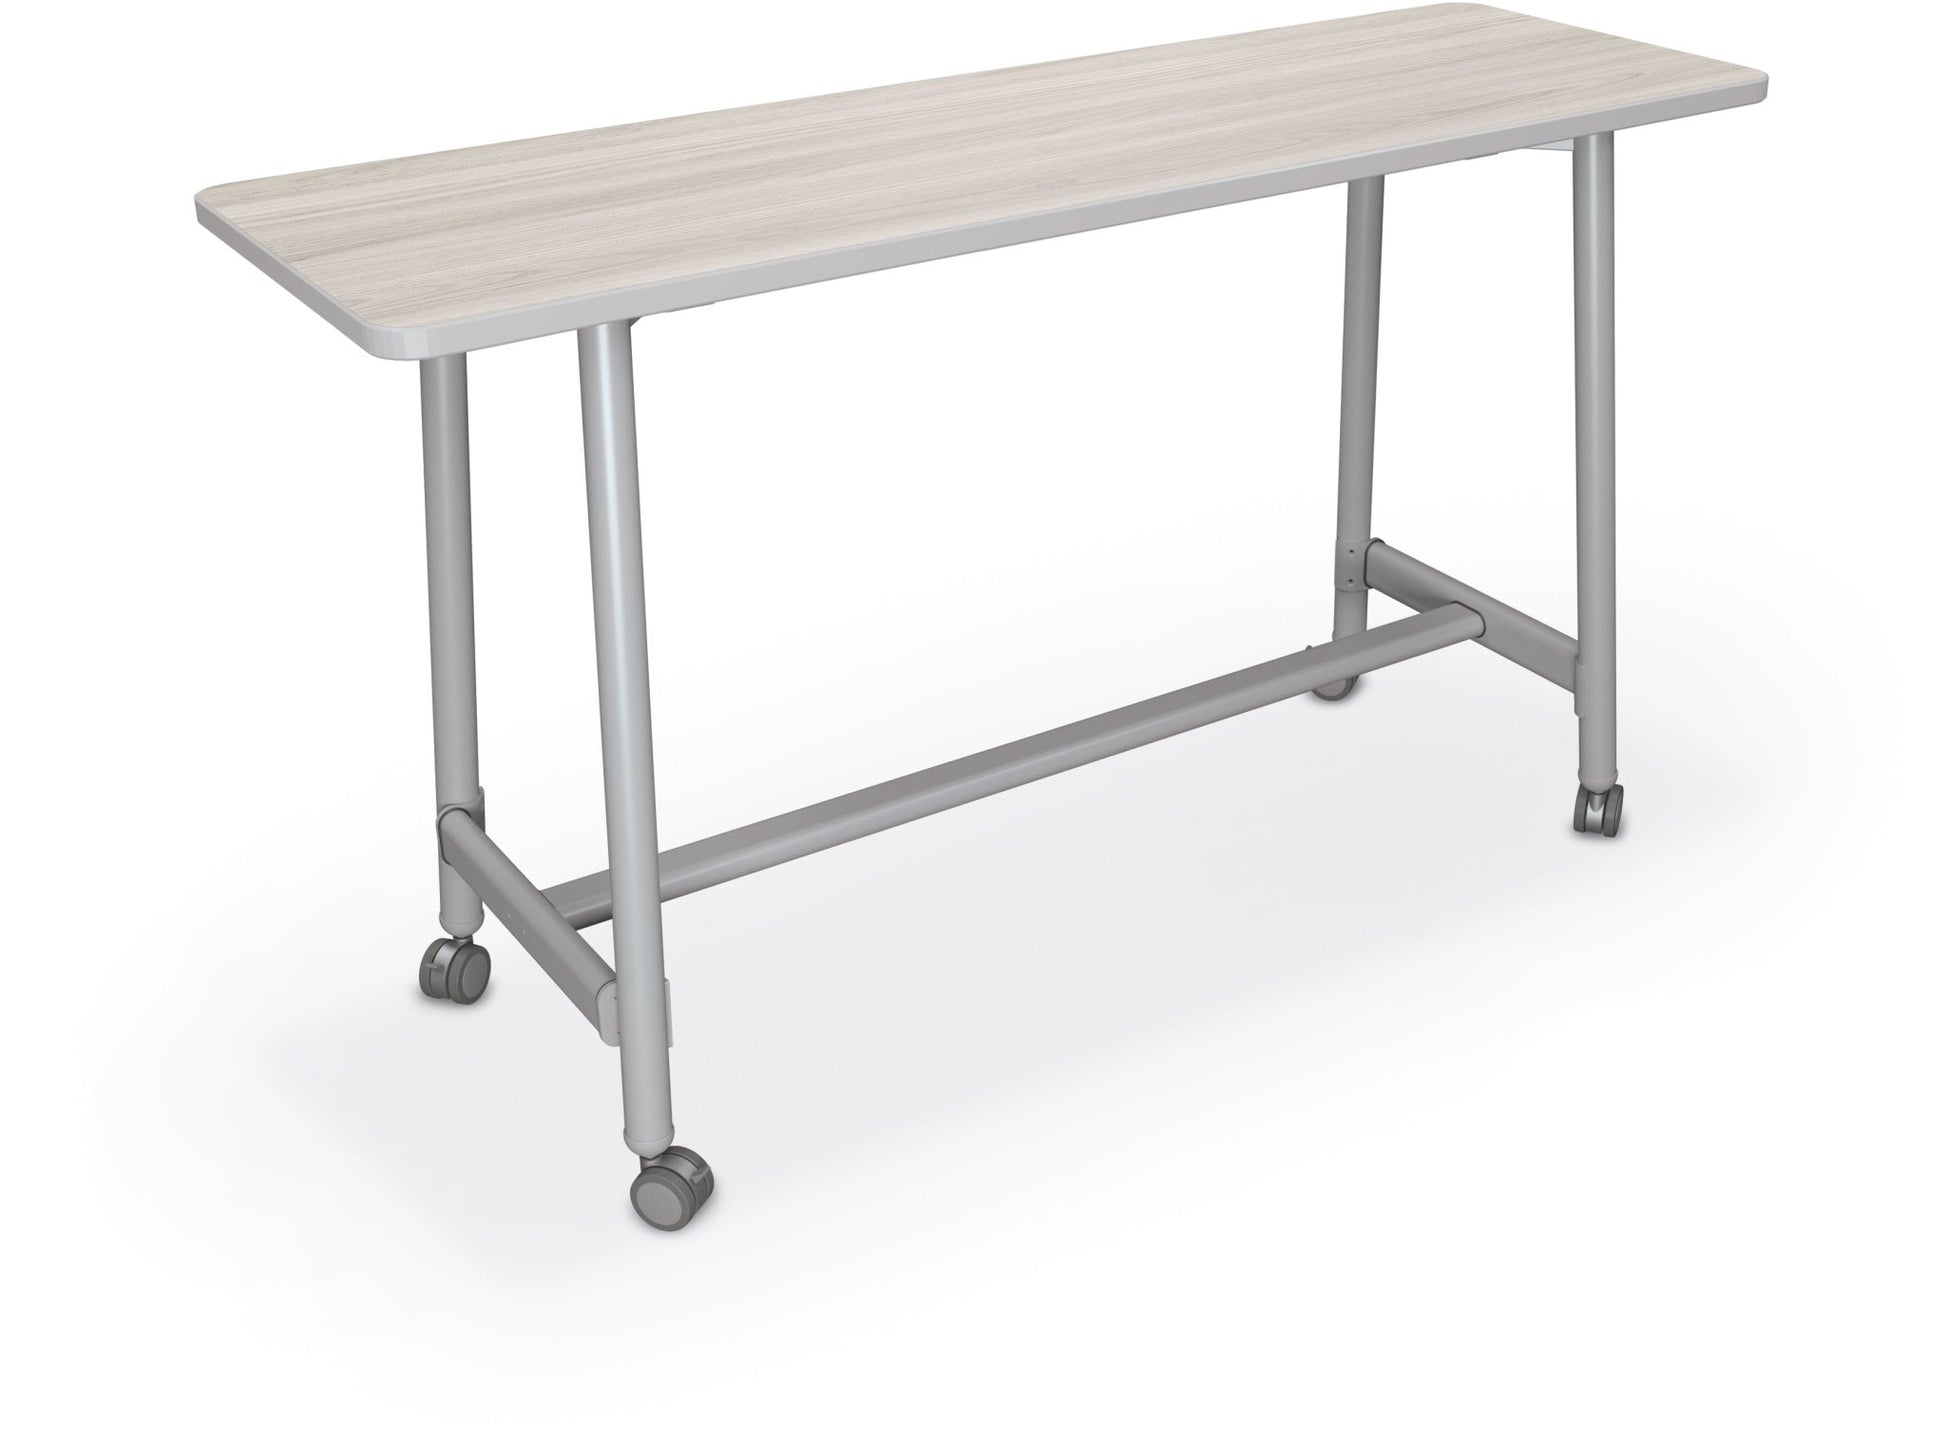 Mooreco Akt Table – 20"D x 72"W Rectangle, Laminate Top, Fixed Height Available in 29"H, 36"H, or 42"H - SchoolOutlet